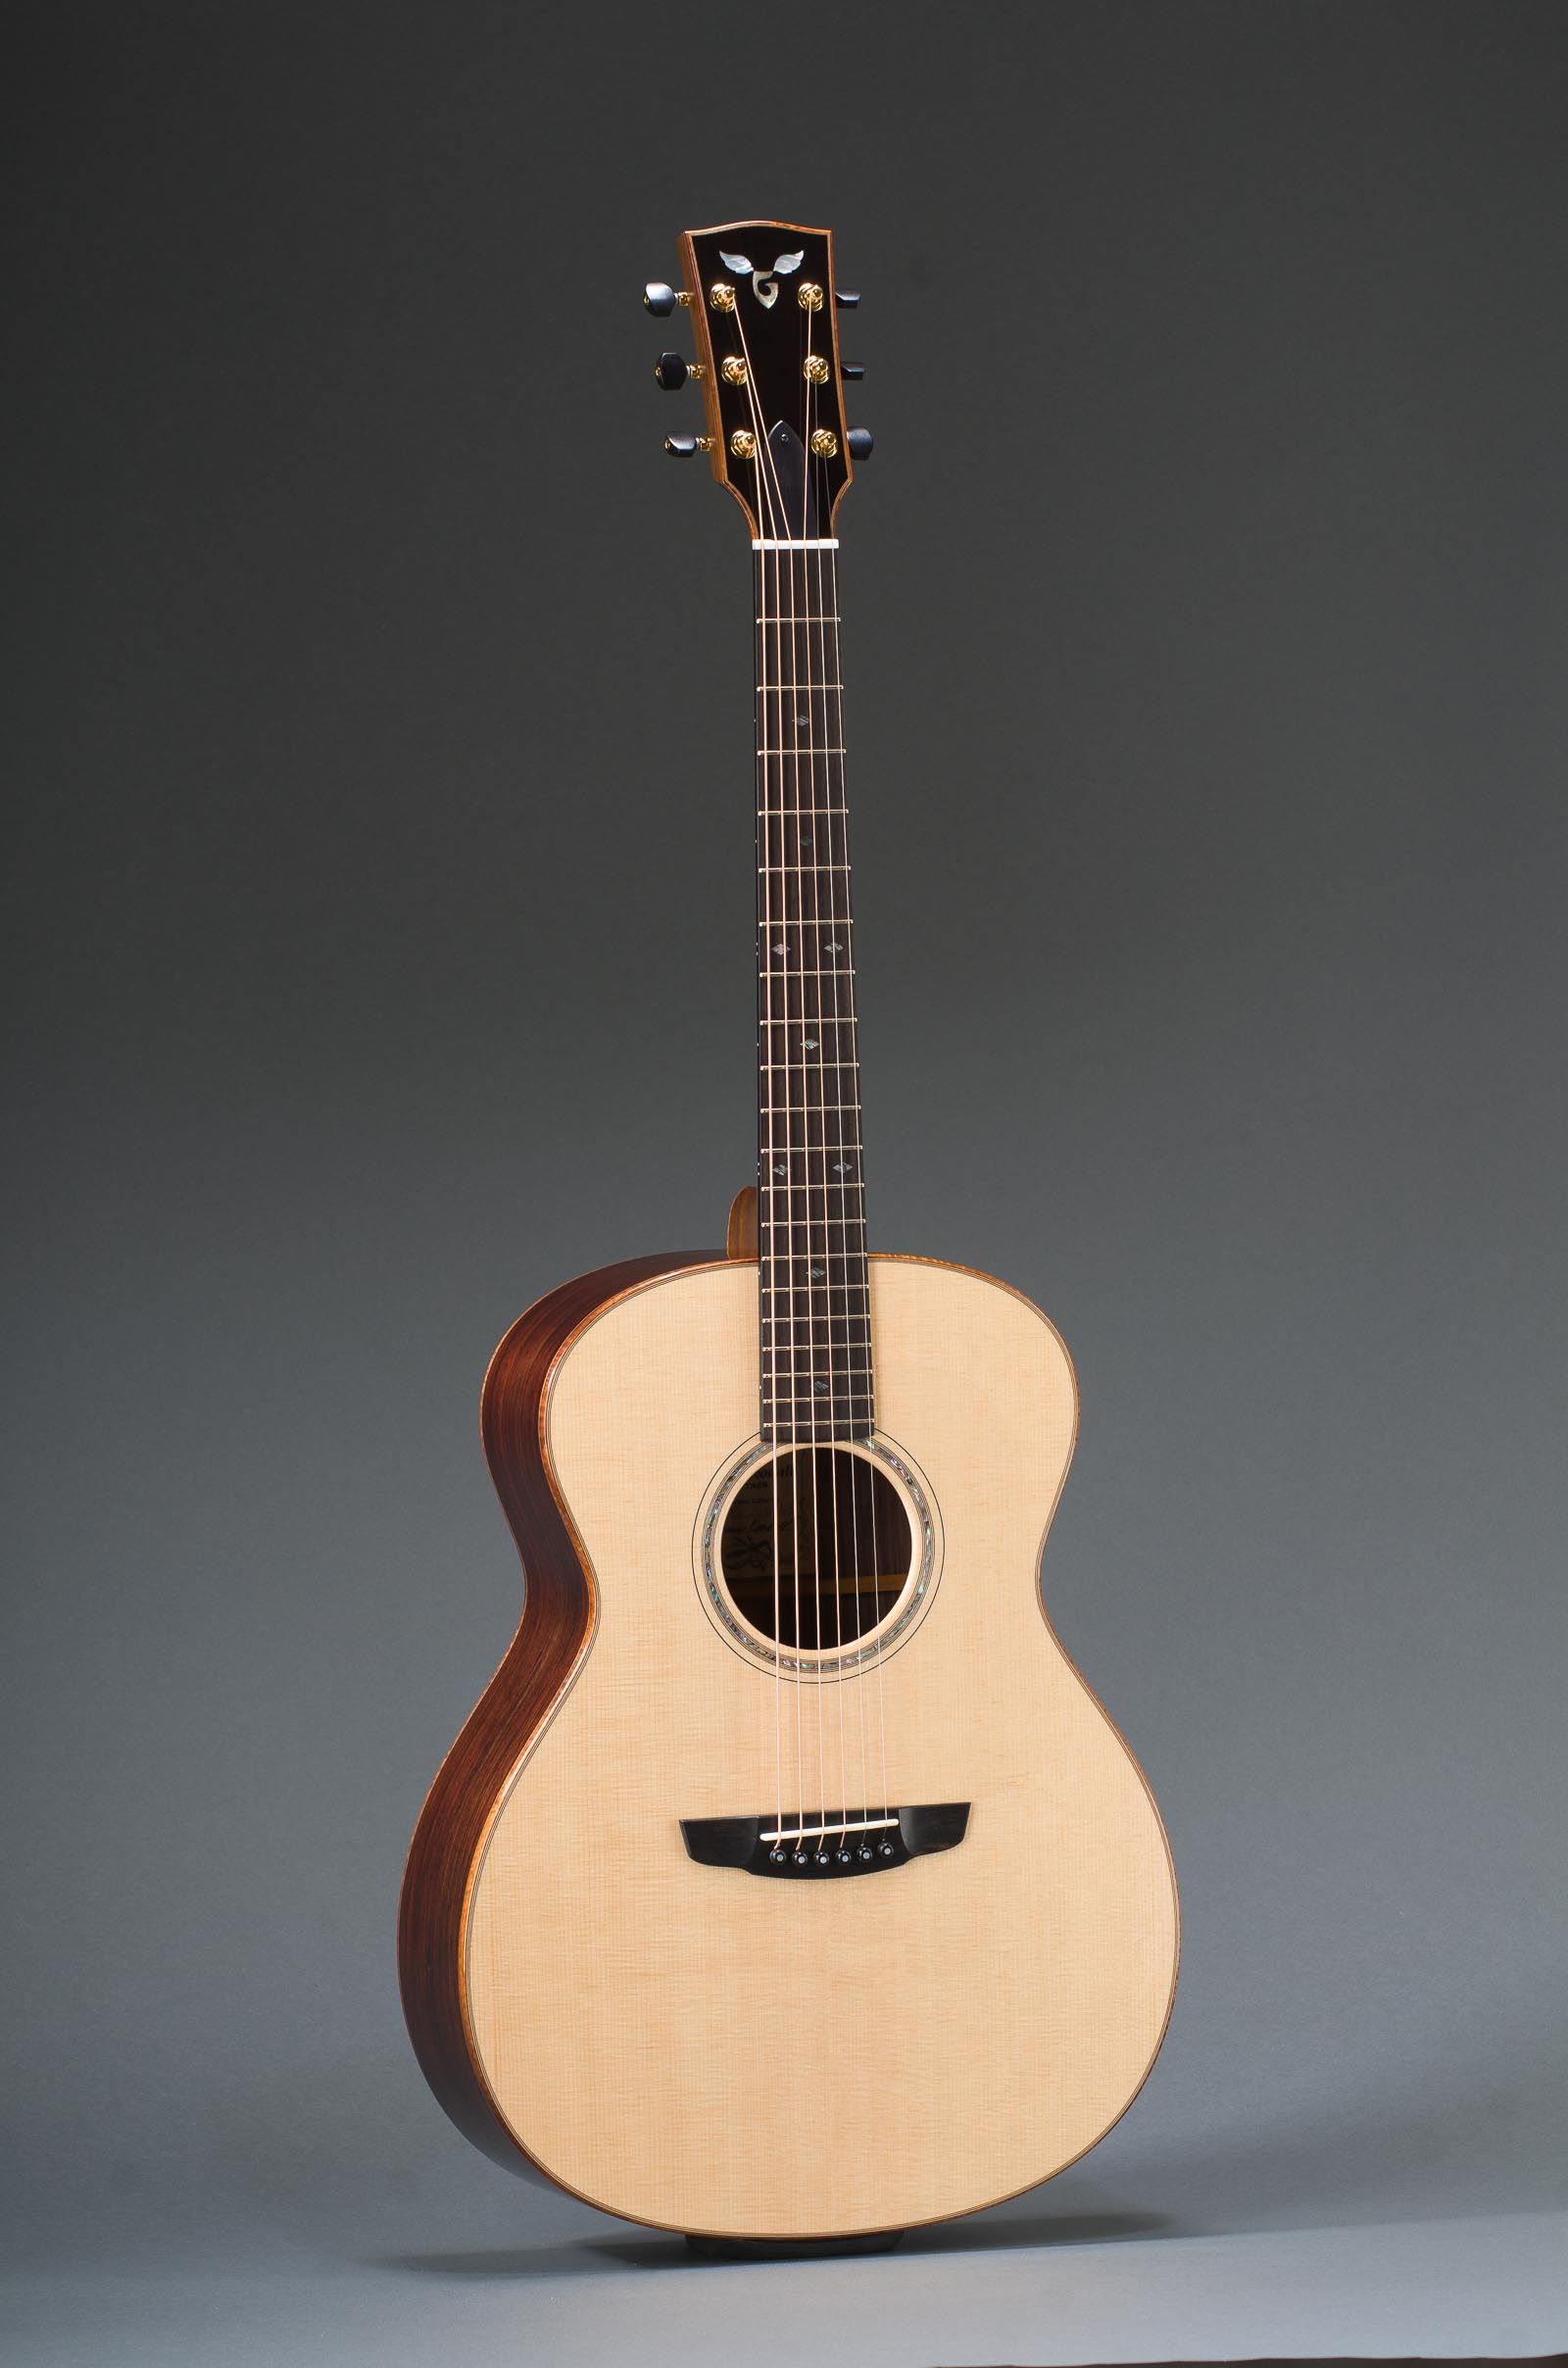 Signature 14 Fret 25" Short Scale East Indian Rosewood Grand Concert With Sitka Spruce Top, Curly Koa Binding, Abalone Rosette